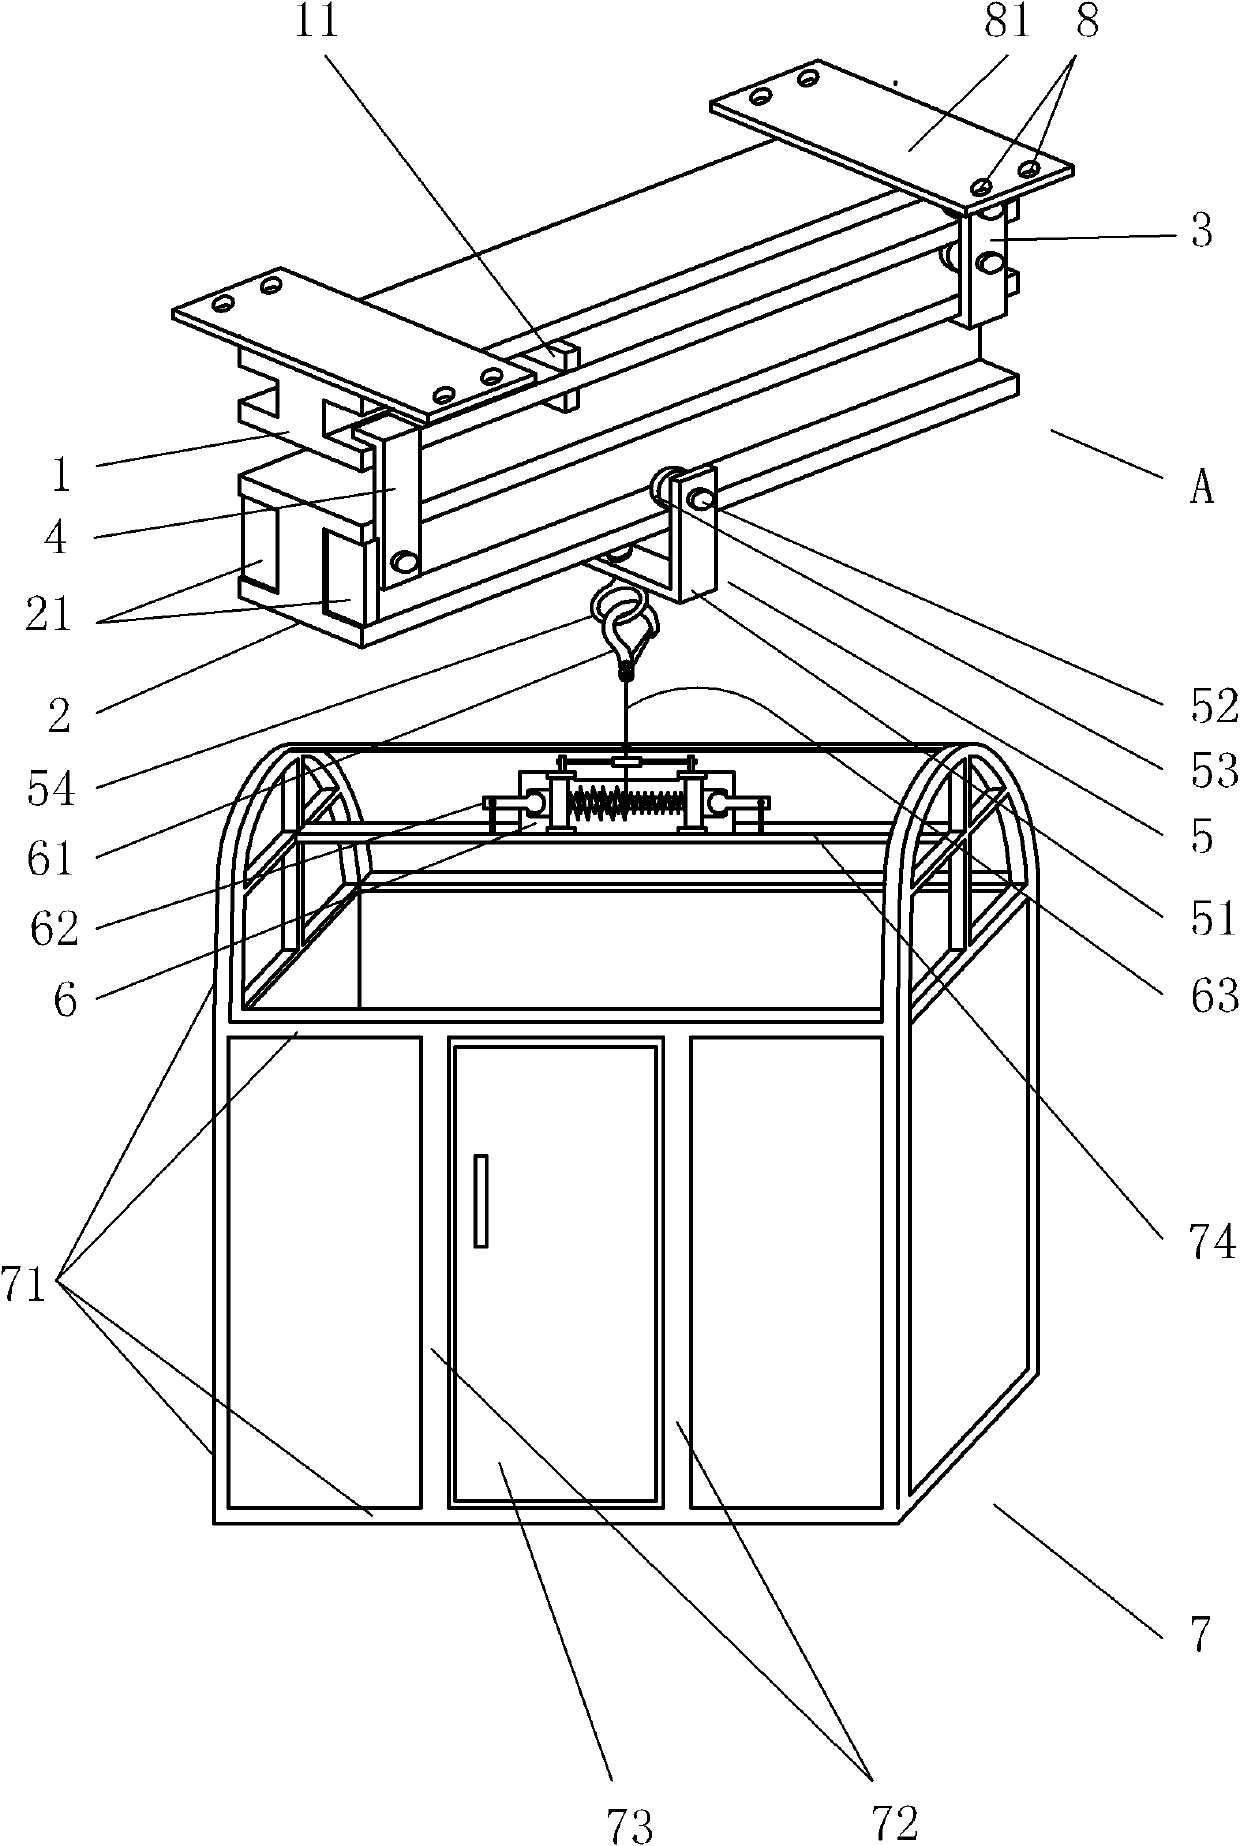 High-rise fire safety escape device with escape hatch